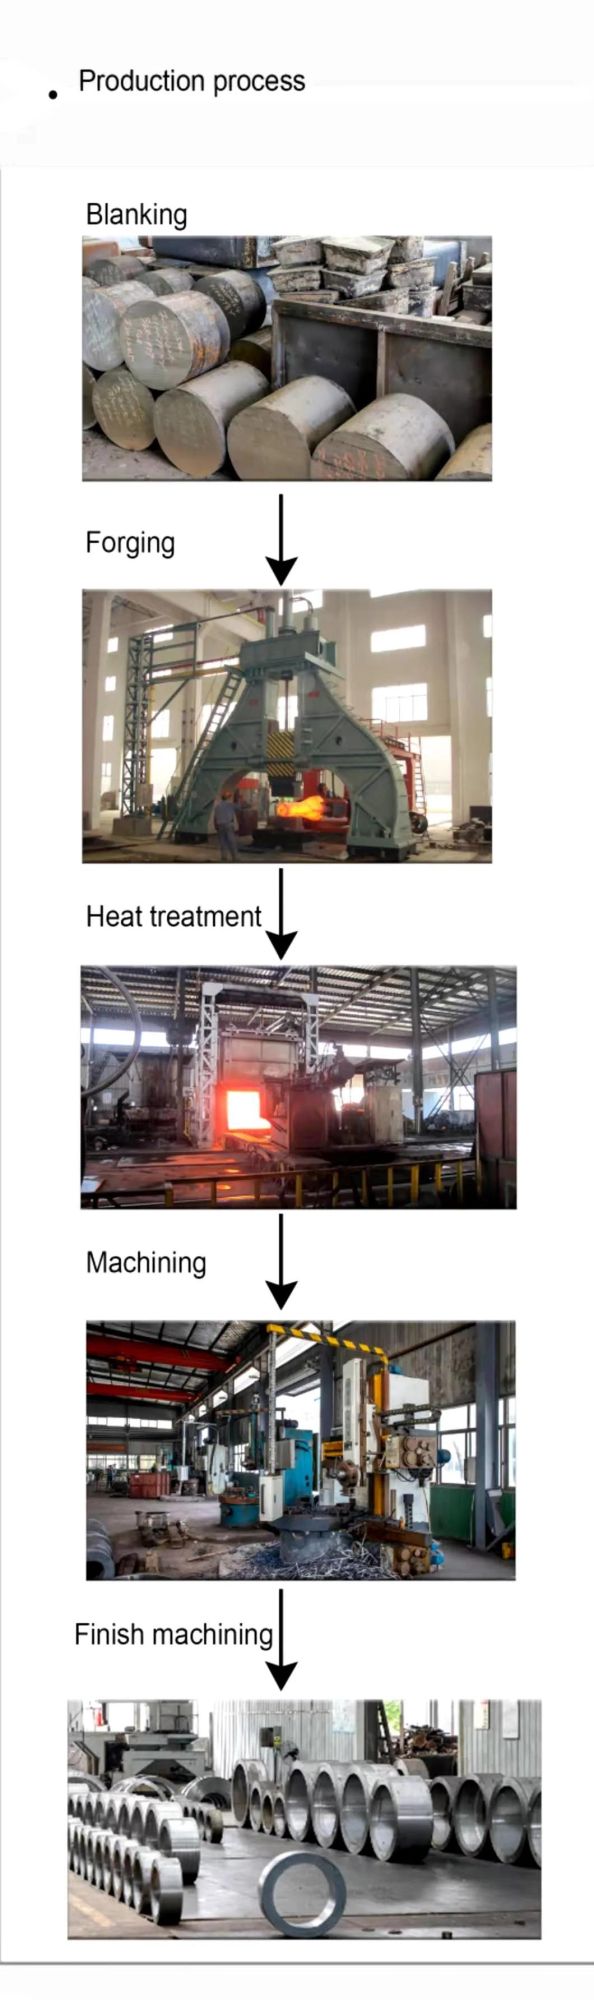 Hot Forging Blank, Mechanical Parts and Complete Sets of Equipment